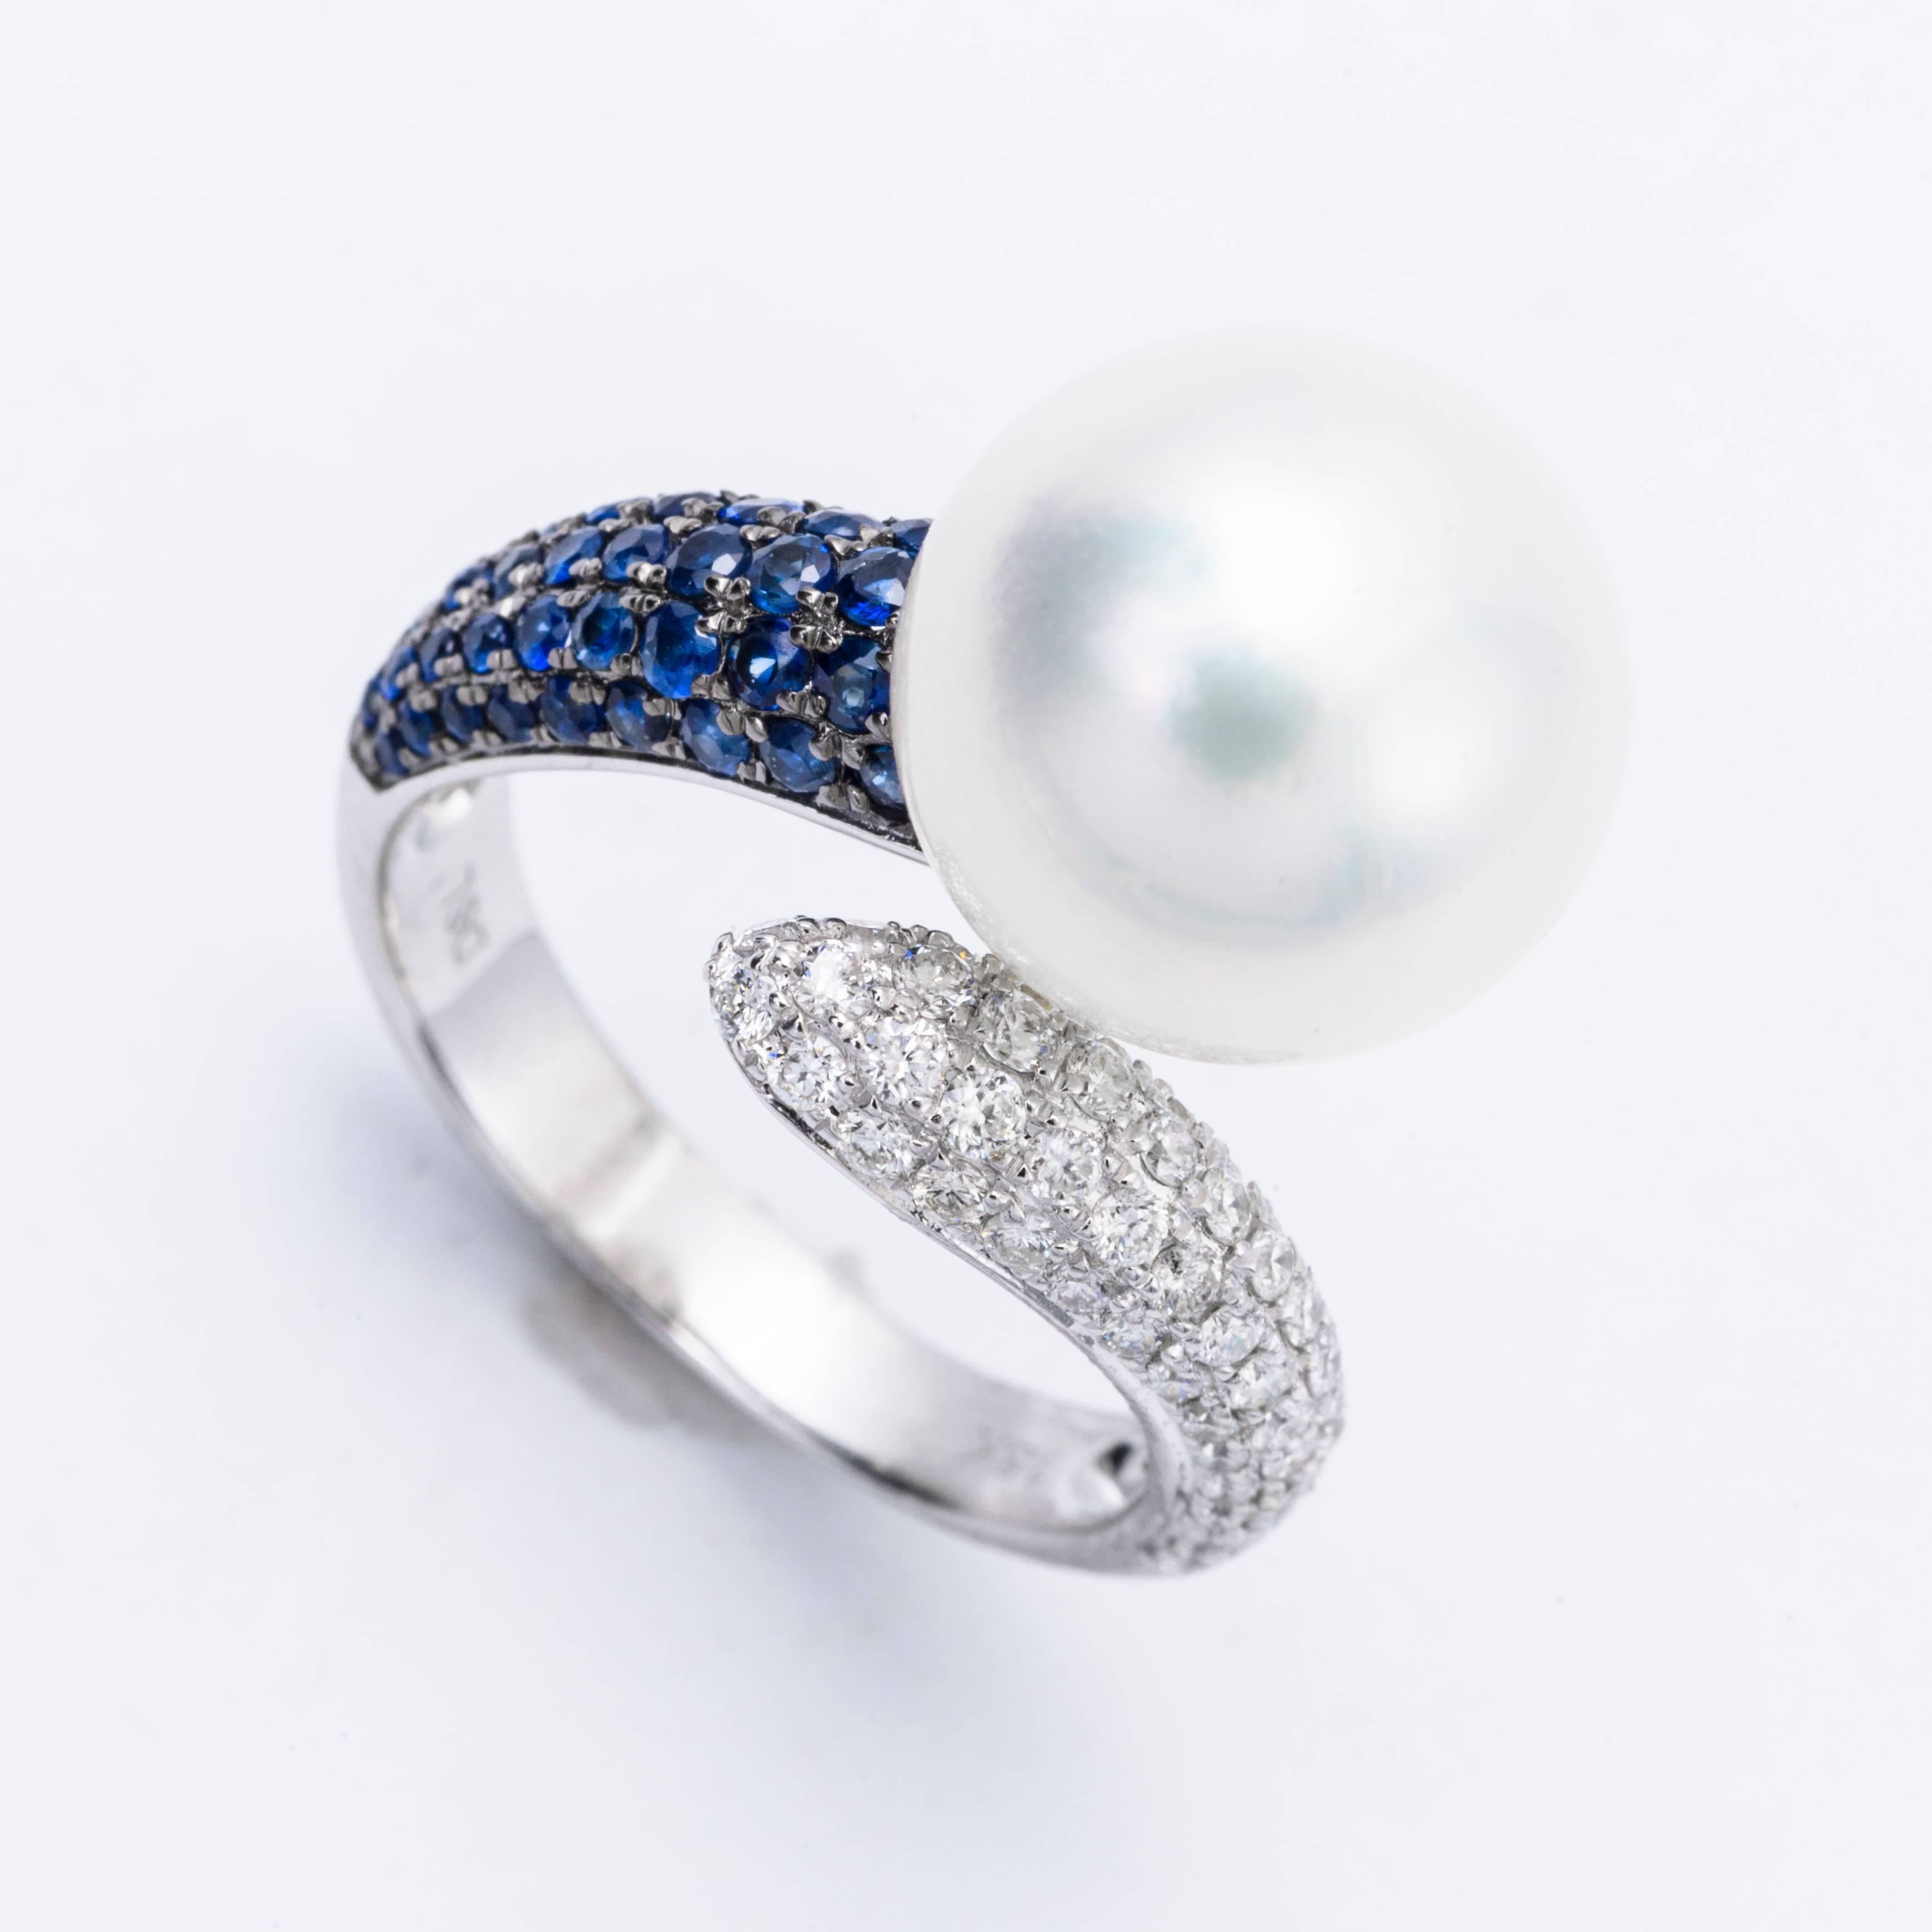 this exceptional ring features: 18K White gold
Sapphire weight: 0.48 Carats
Diamonds Weight:: 0.46 Carats
South Sea Pearl; 12-13 mm 
Ring size: 6.5 We Re size free of charge